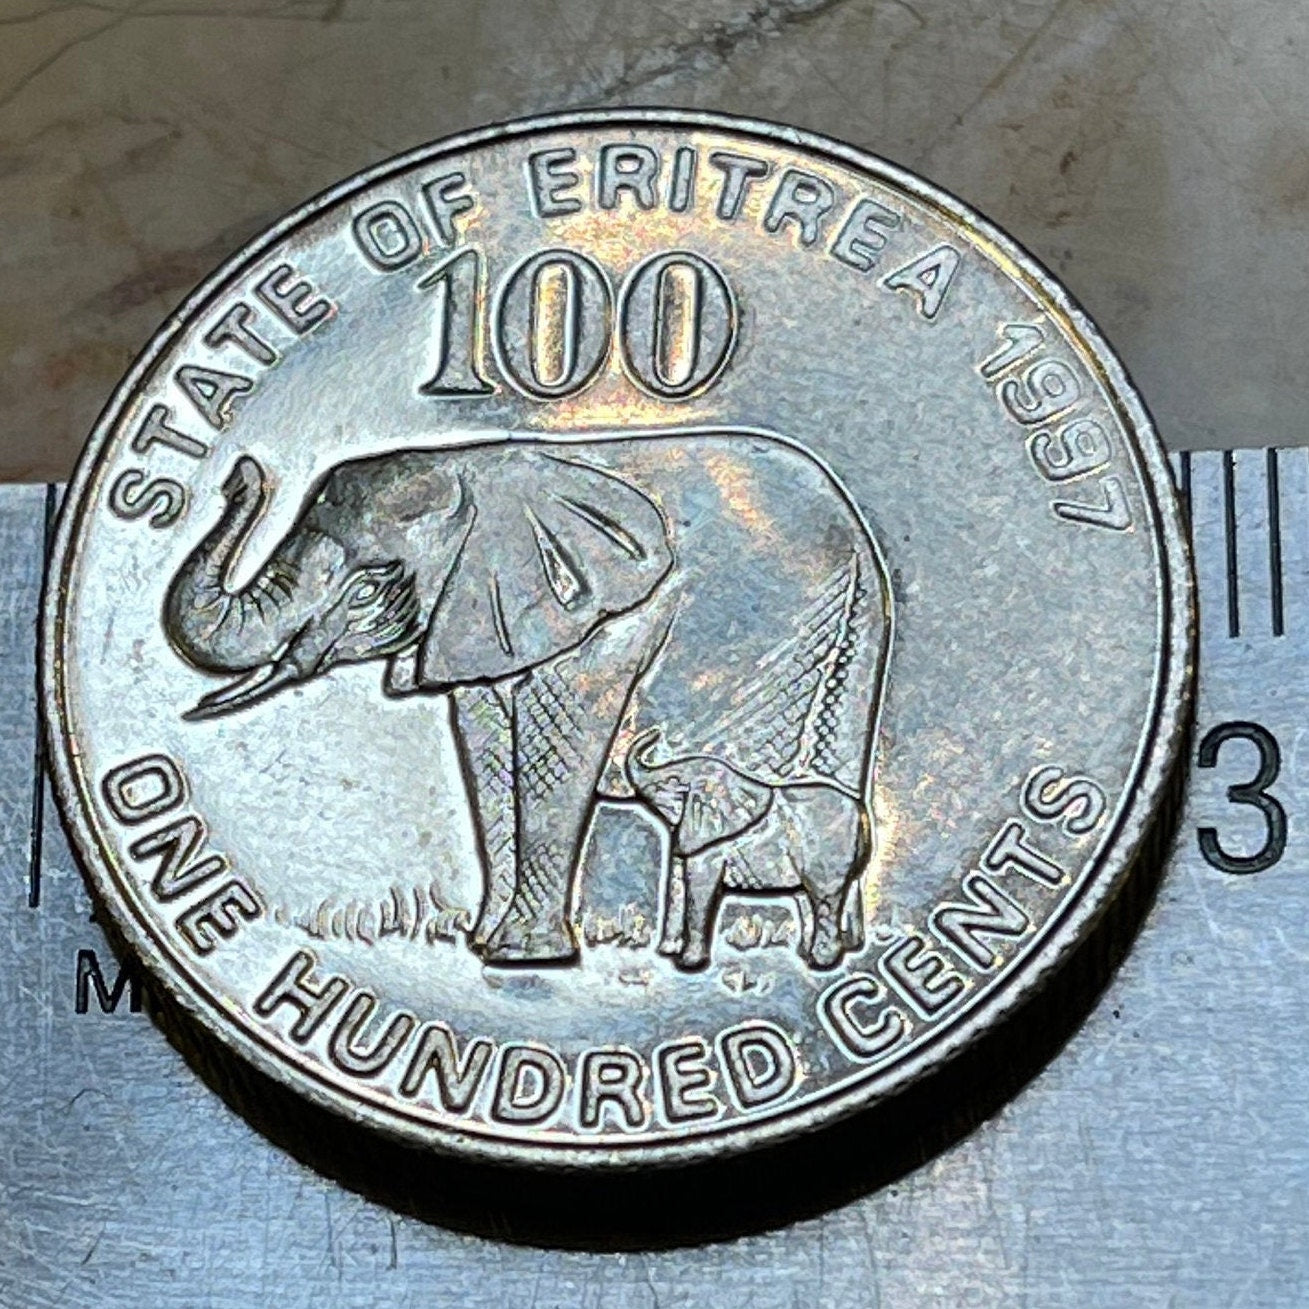 Elephant with Baby & Liberty Equality Justice 100 Cents Eritrea Authentic Coin Money for Jewelry and Craft Making